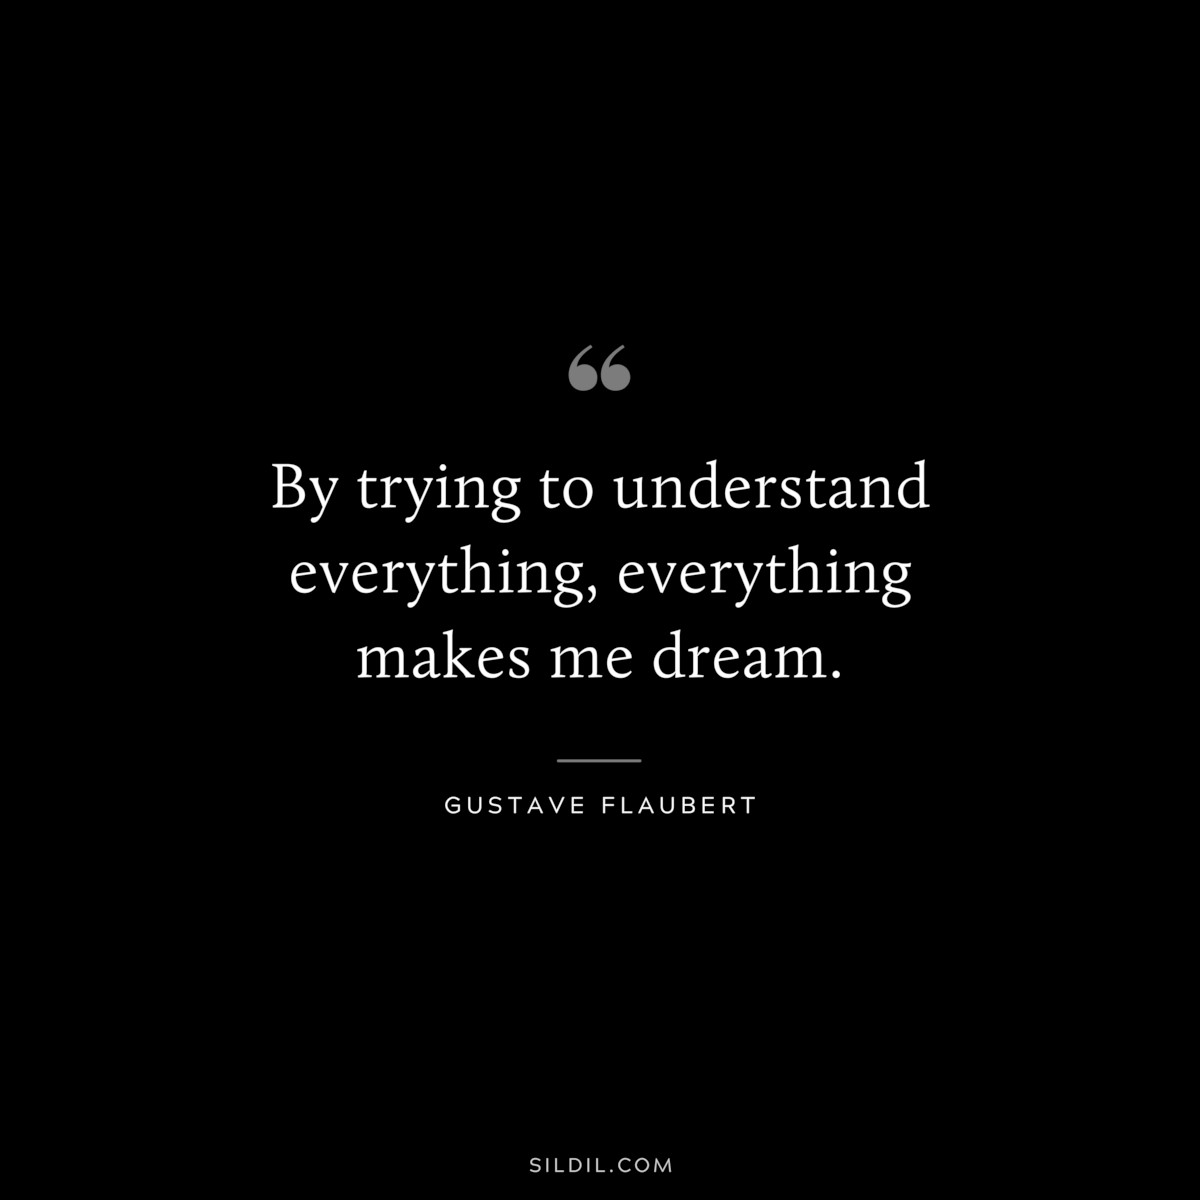 By trying to understand everything, everything makes me dream. ― Gustave Flaubert